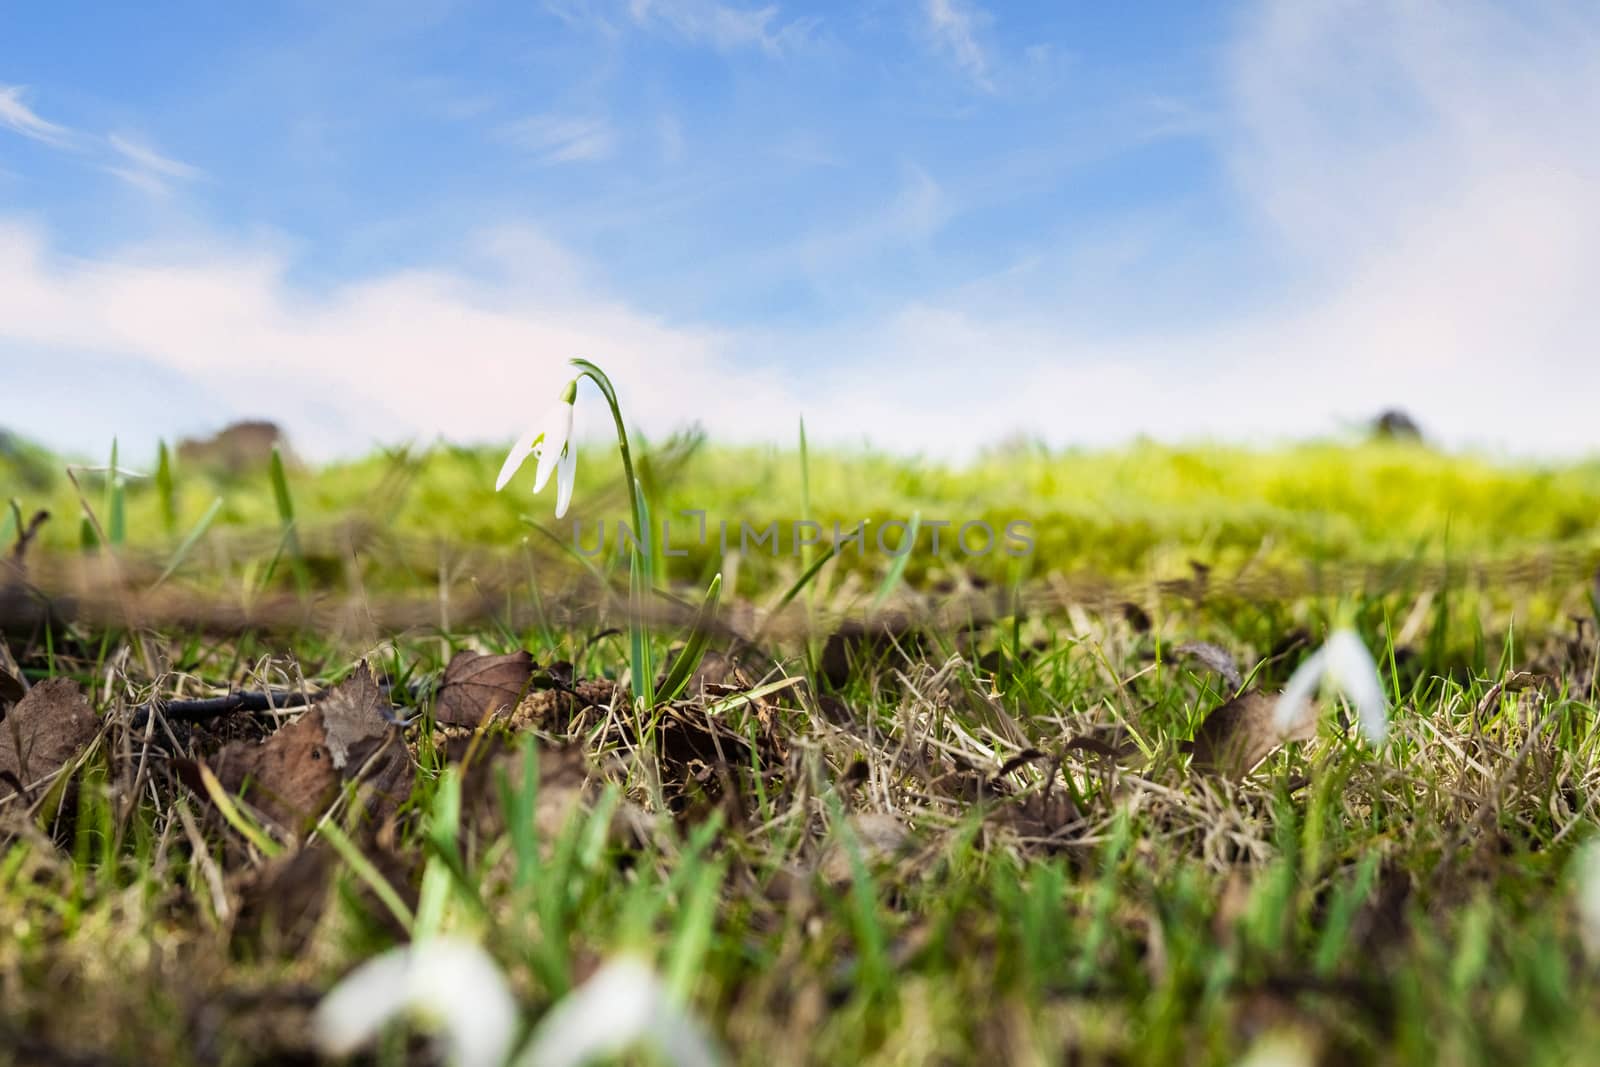 Snowdrop flowers on a green meadow in the spring by Sportactive